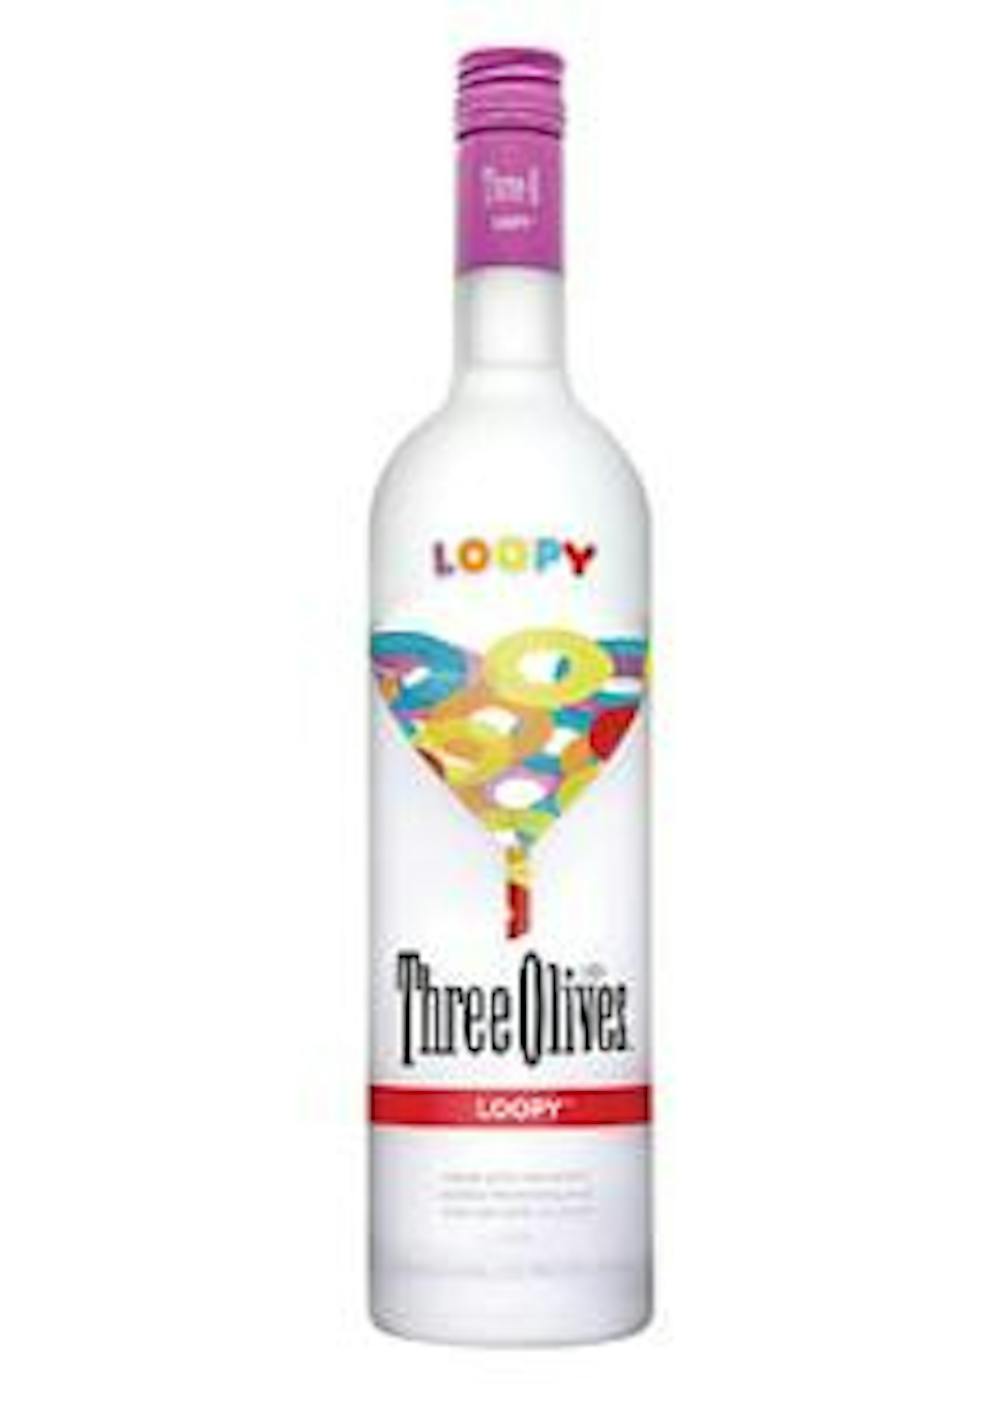 three olives loopy calories